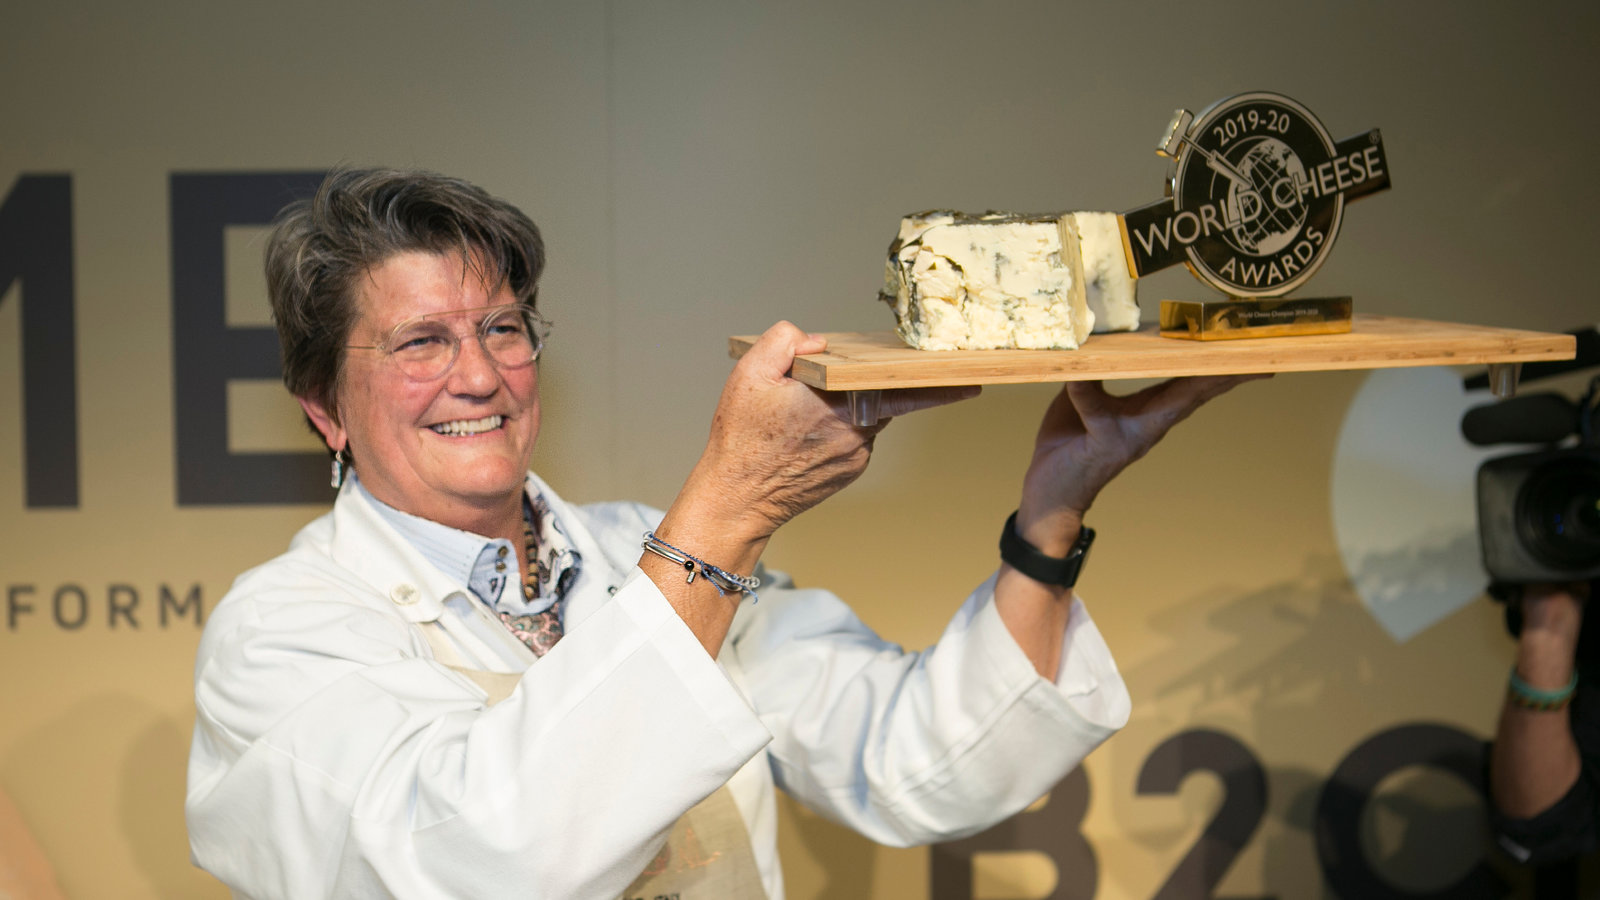 Woman holding Rogue Creamery's World Famous Rogue River Blue at the World Cheese Awards in 2019/2020